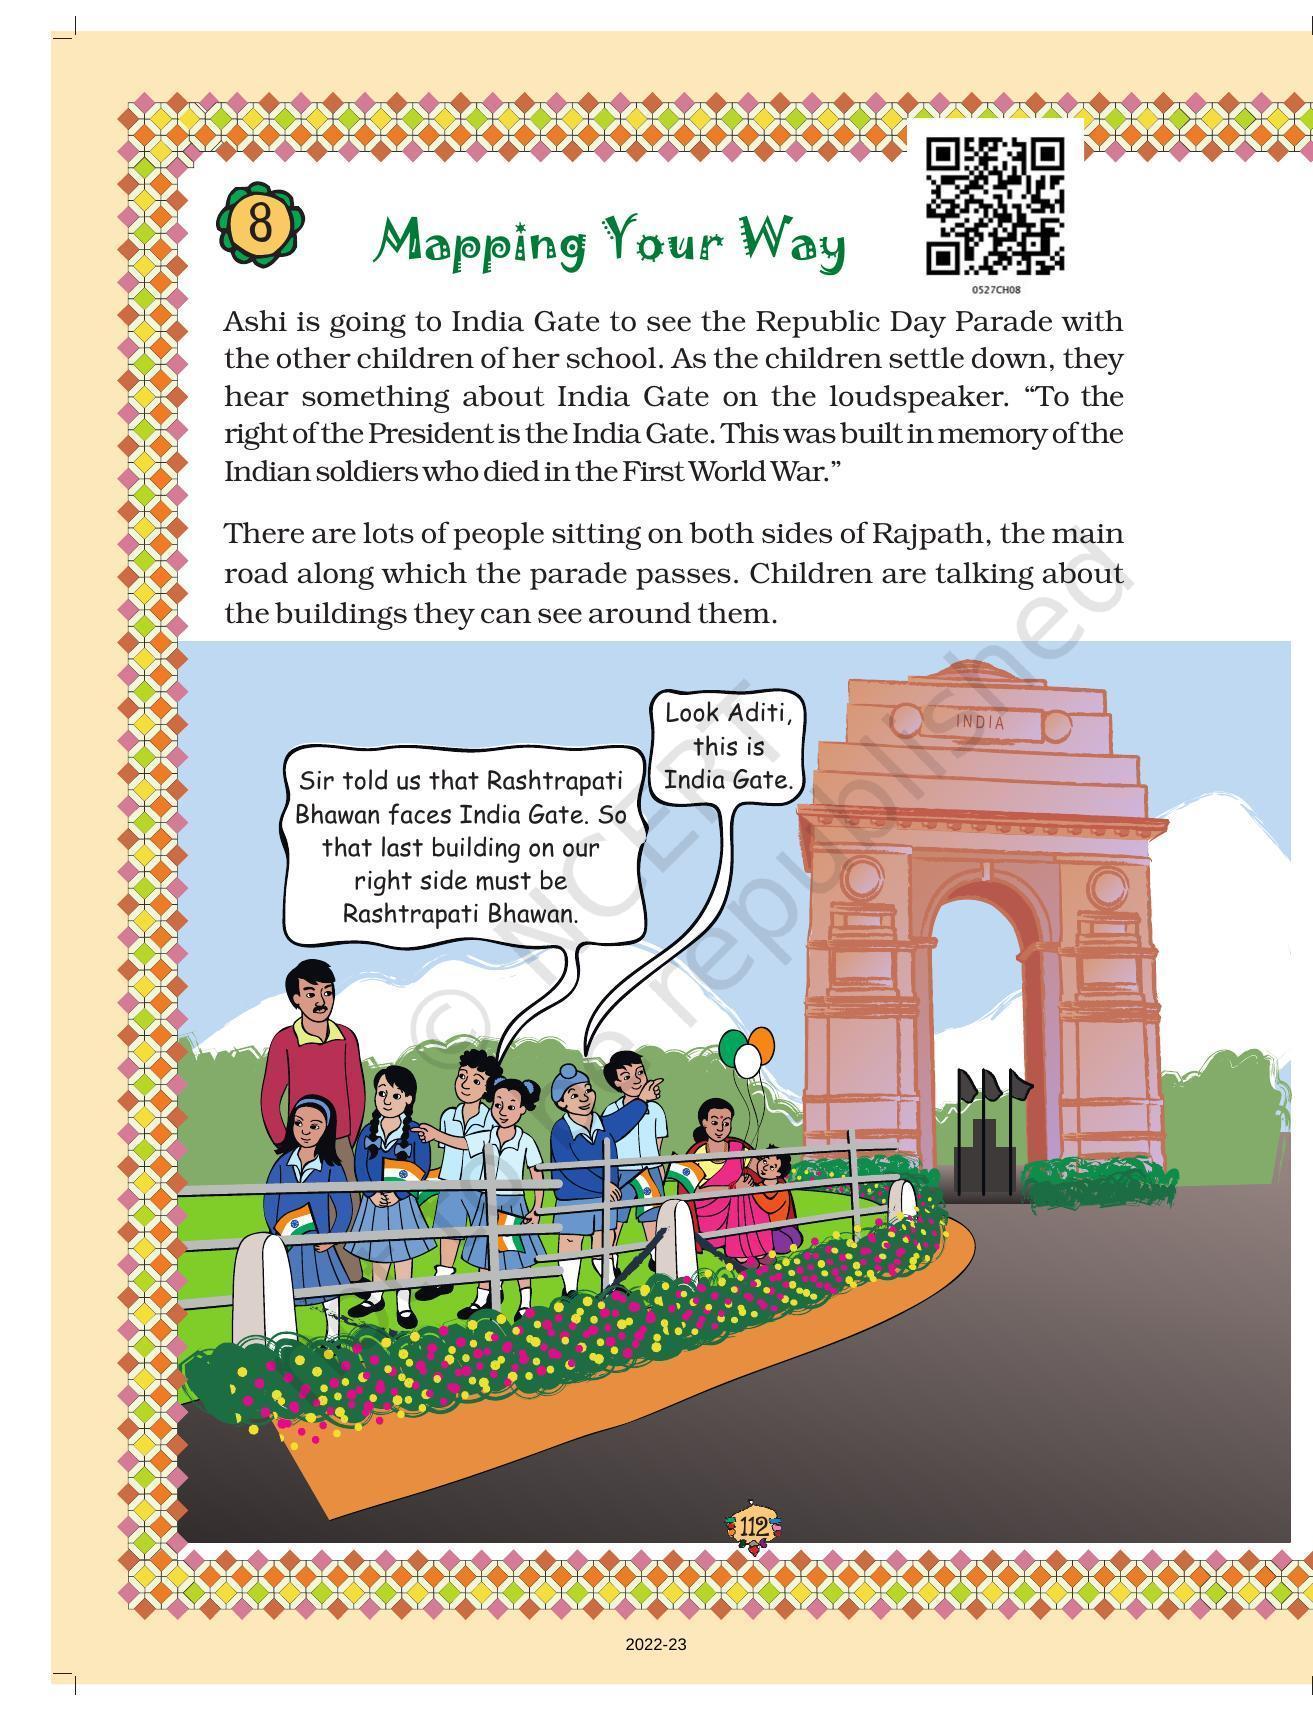 NCERT Book for Class 5 Maths Chapter 8 Mapping Your Way - Page 1